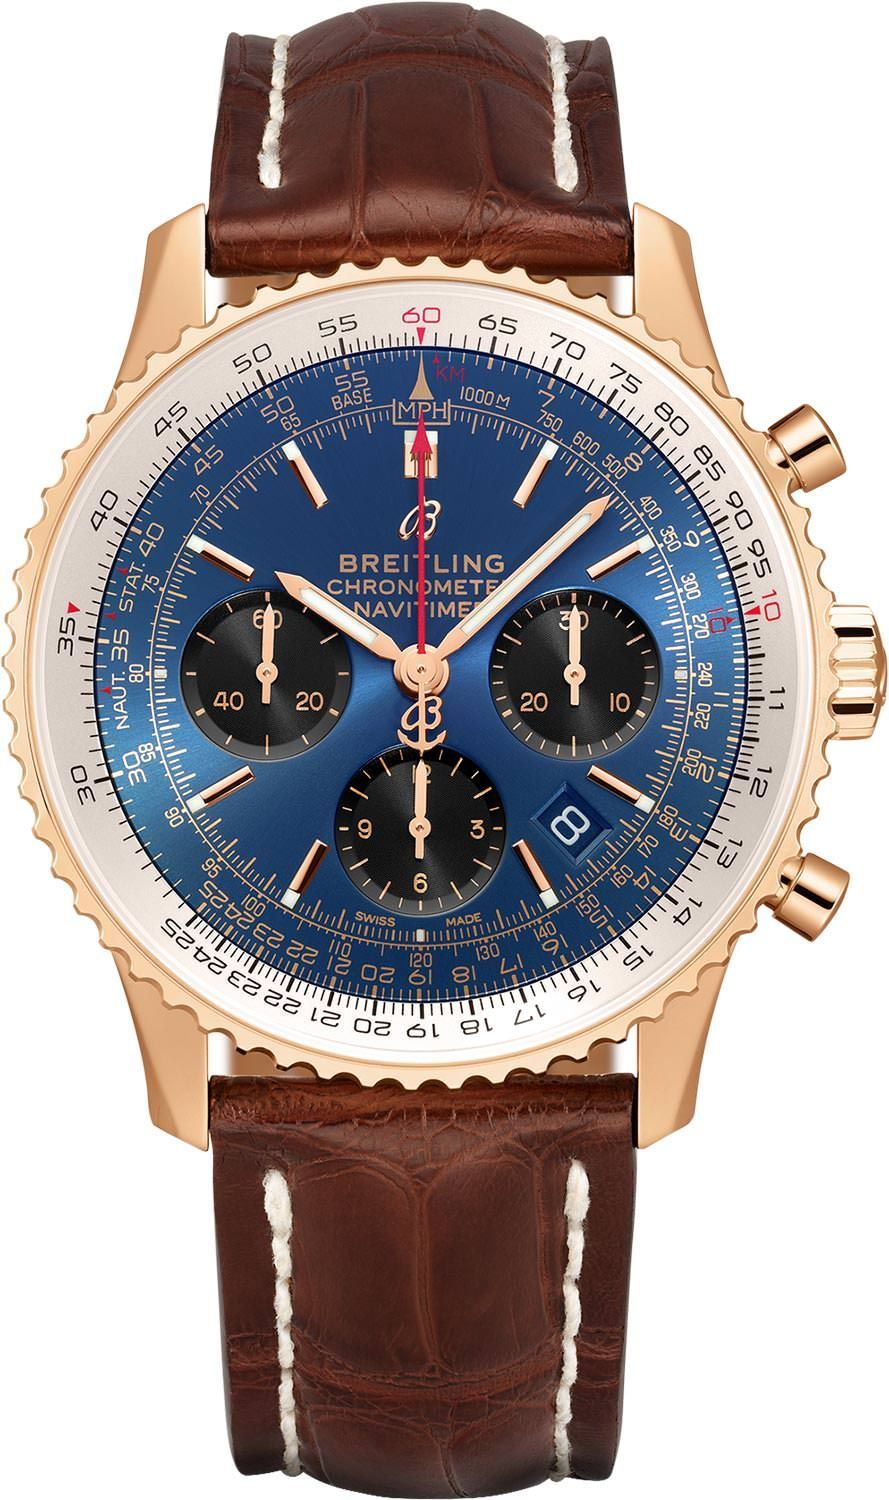 Breitling  43 mm Watch in Blue Dial For Men - 1